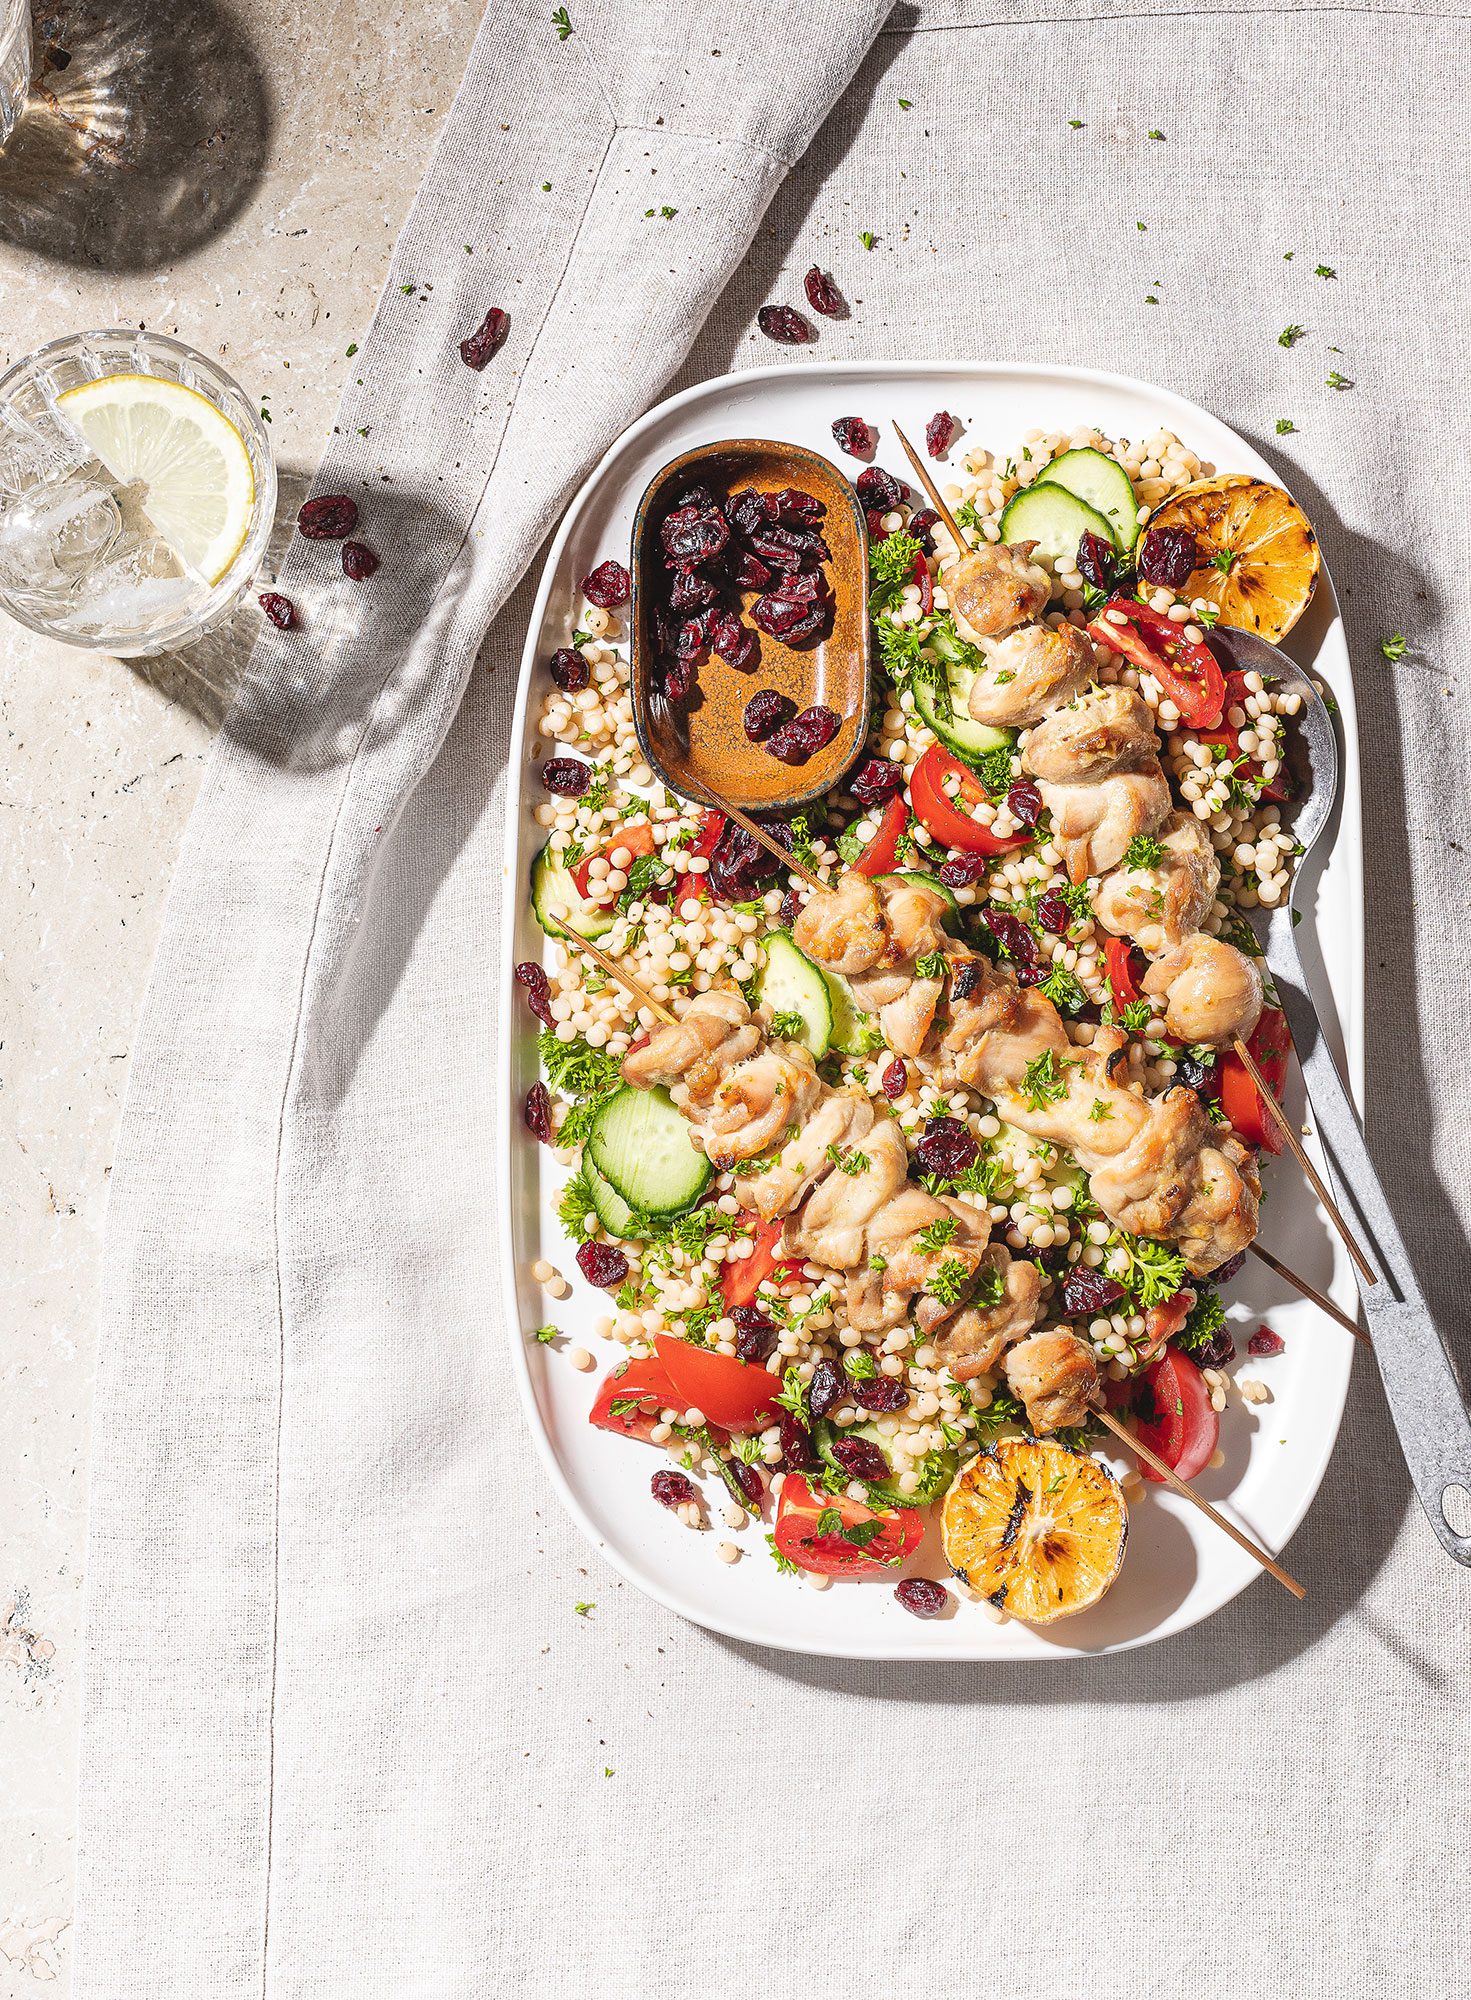 Embrace sun-kissed flavours with this Mediterranean Israeli Couscous Salad